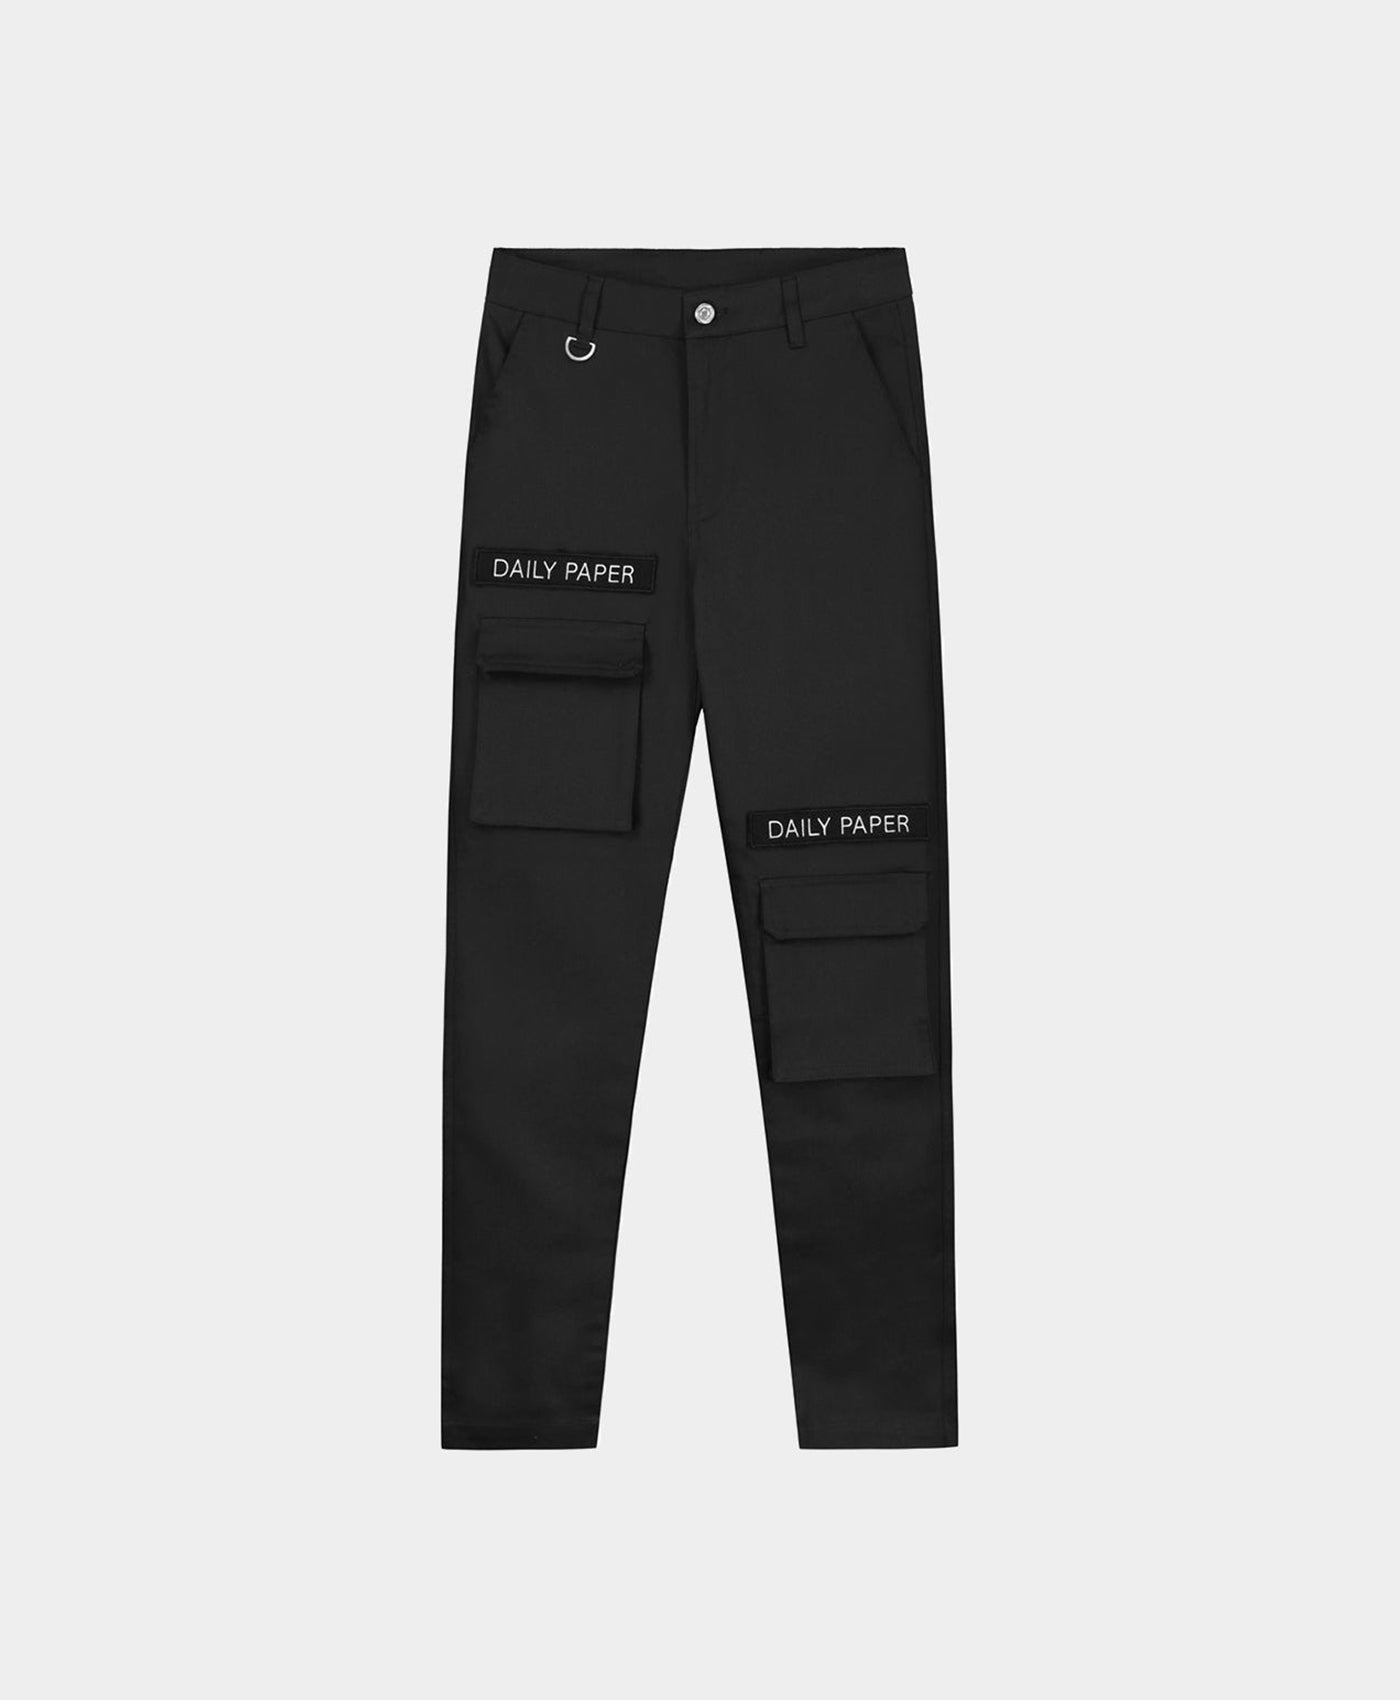 Daily Paper - Pants Black – Daily Paper Worldwide